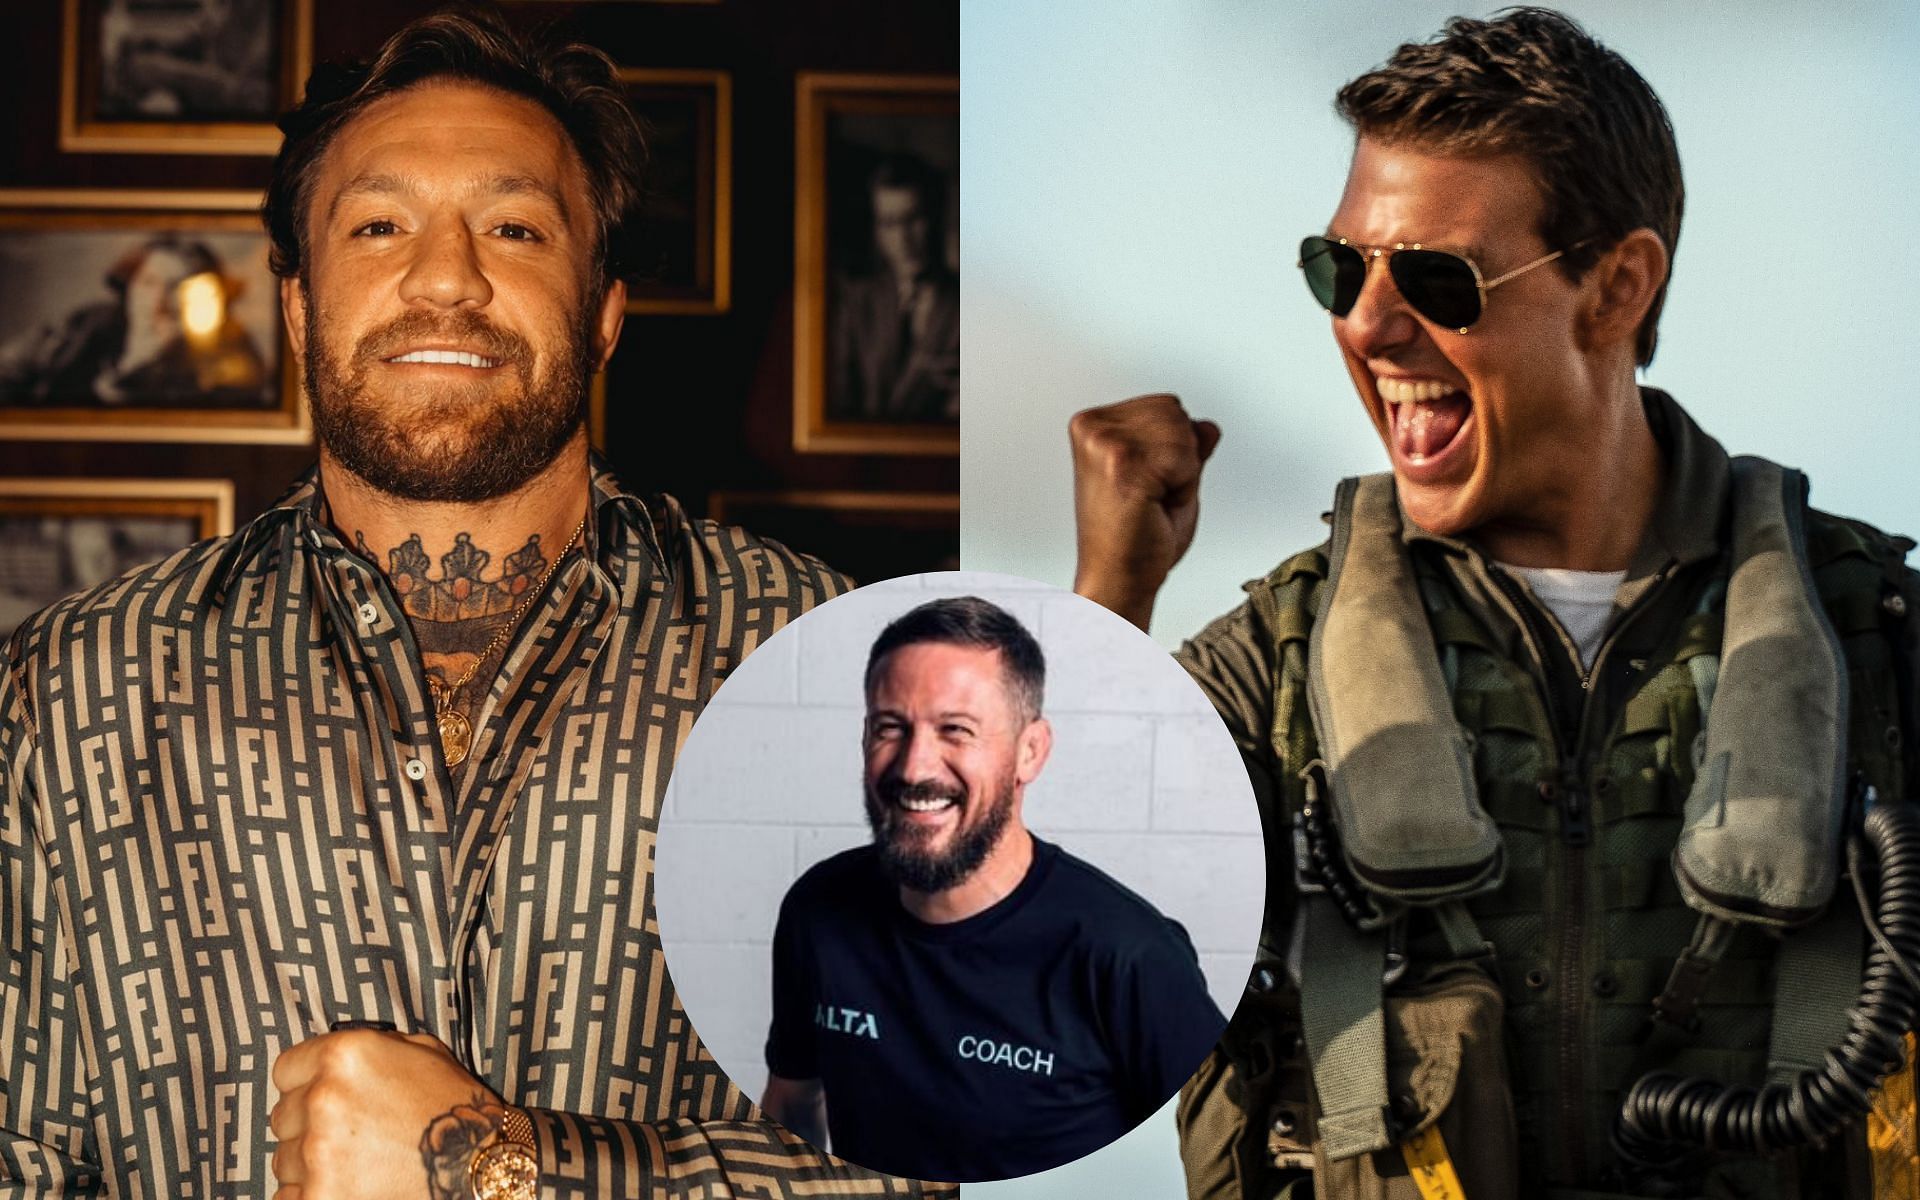 John Kavanagh [Middle] says Conor McGregor [Left] could join Tom Cruise [Right] in Top Gun 3 [Image courtesy: @John_Kavanagh, @TheNotoriousMMA, and @TopGunMovie - X, Paramount Pictures]